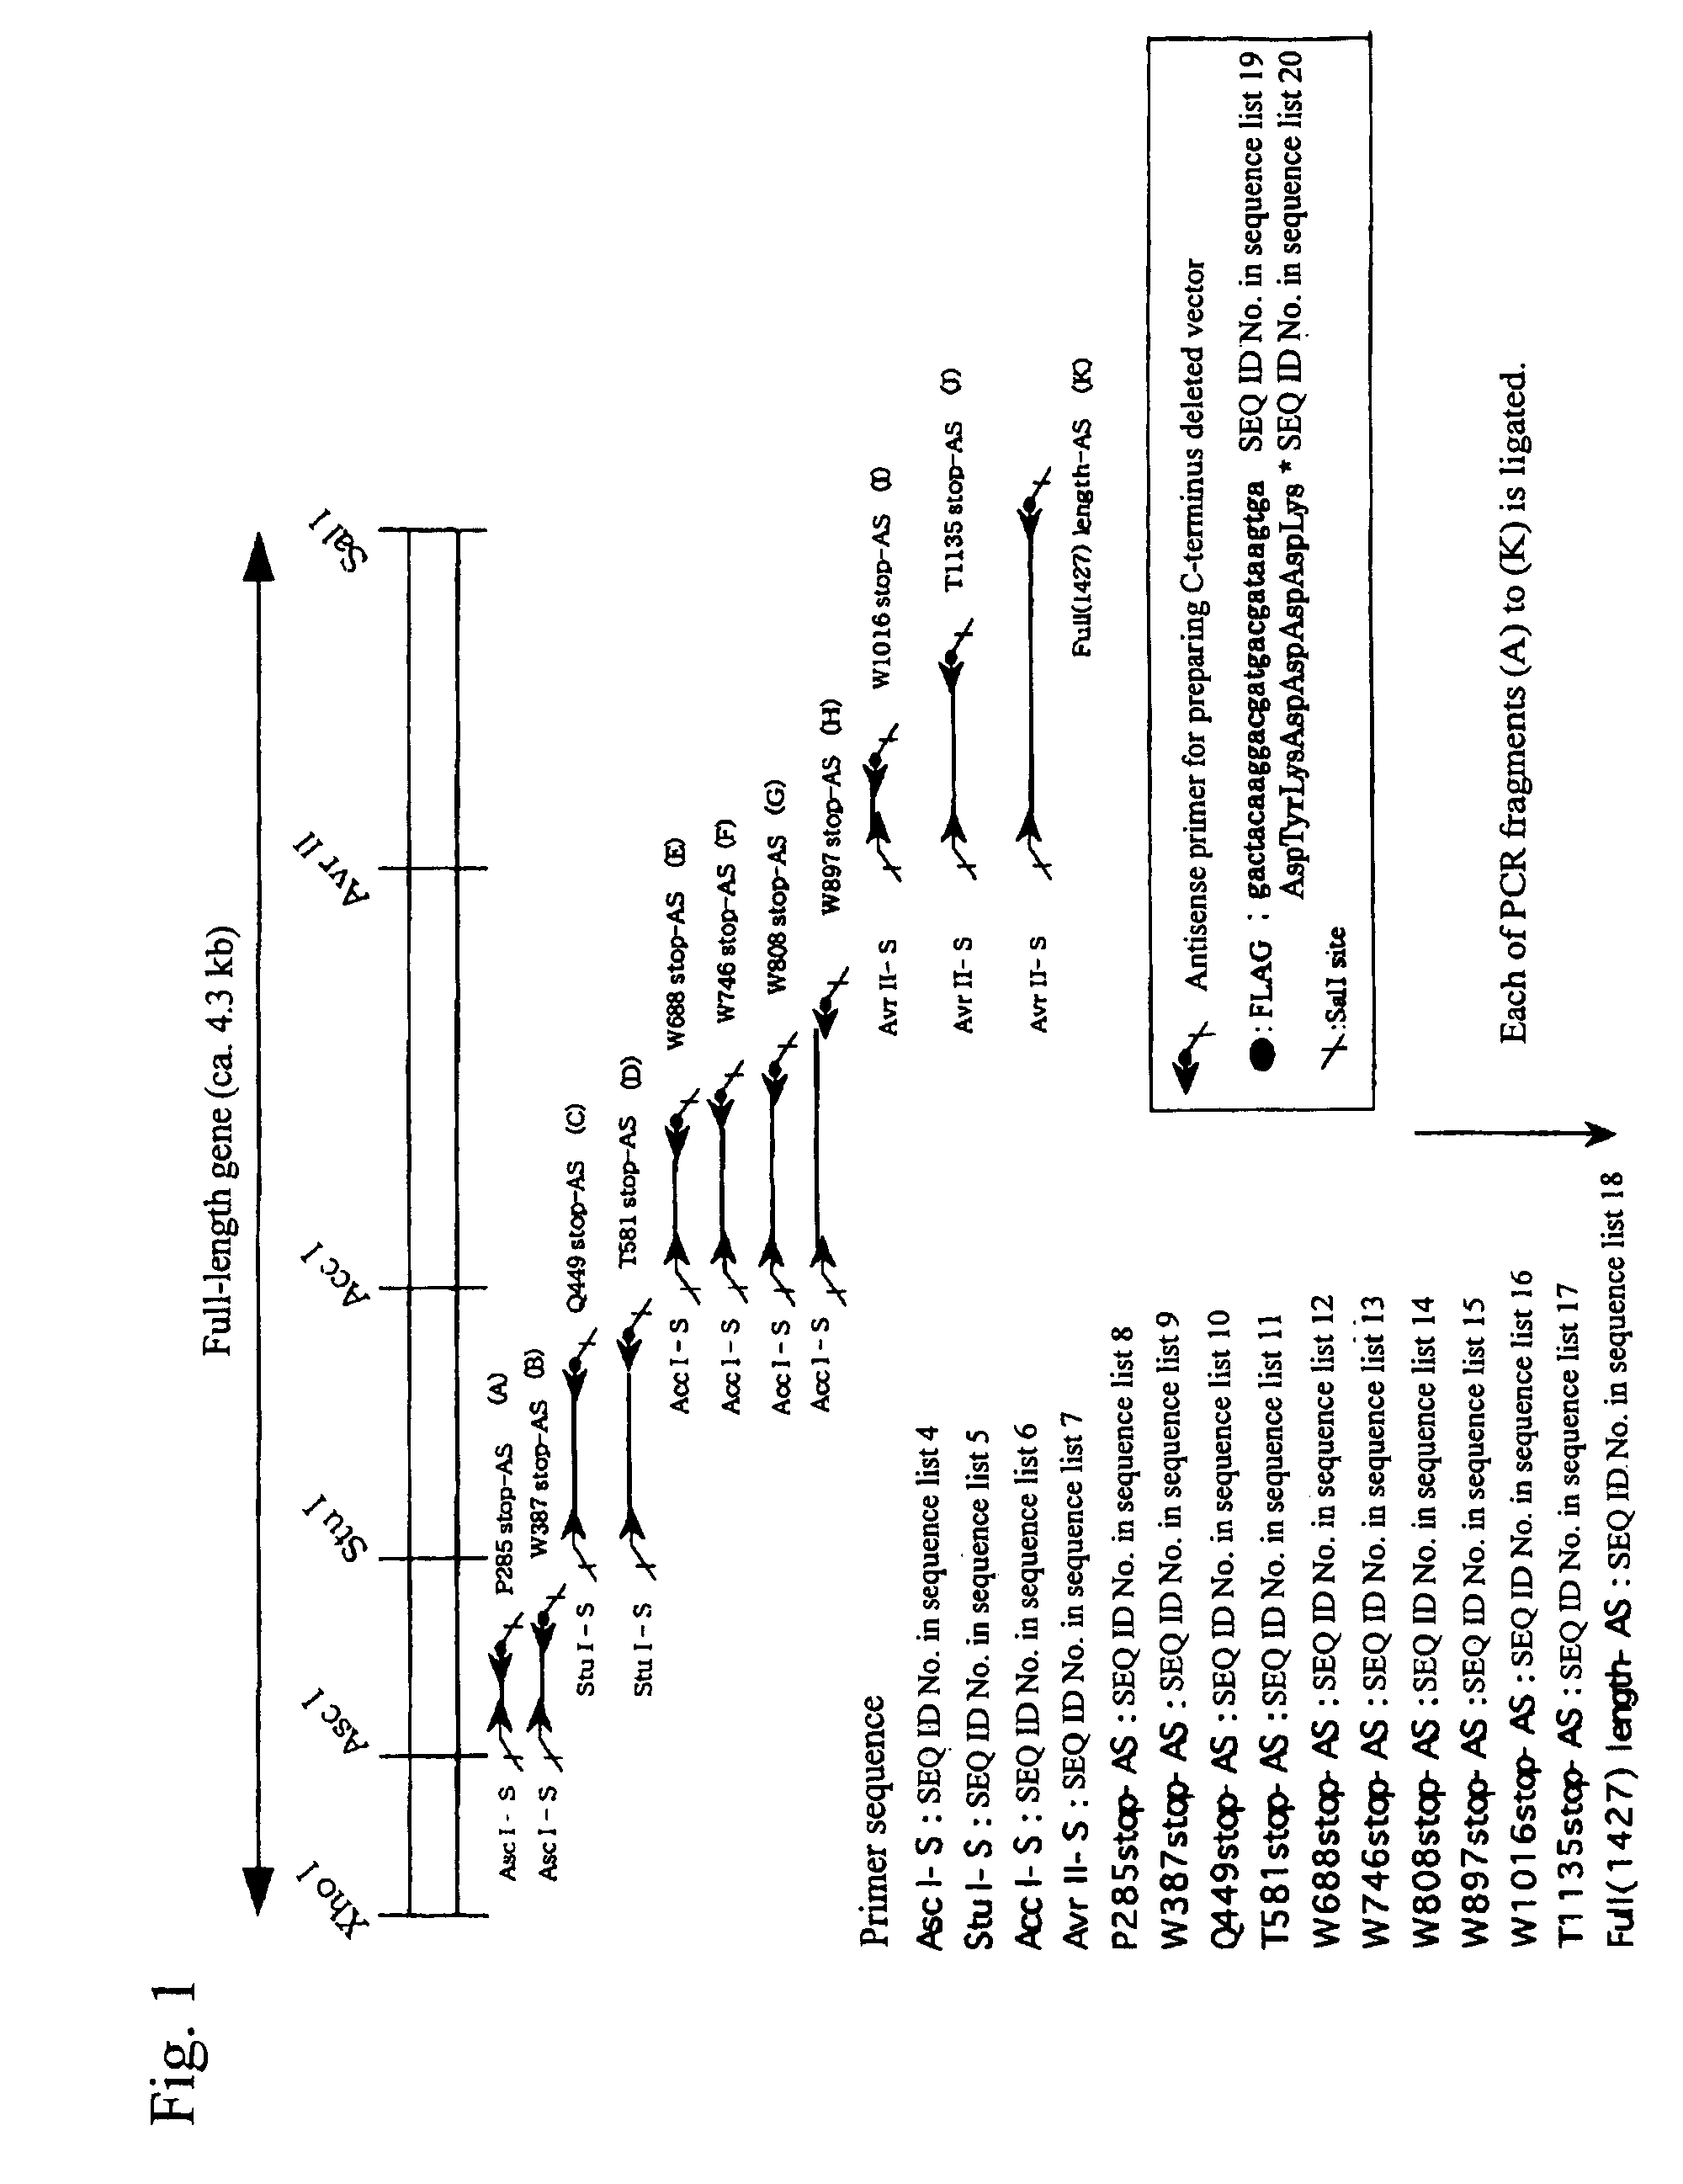 Antibody against von Willebrand factor cleaving enzyme and assay system using the same